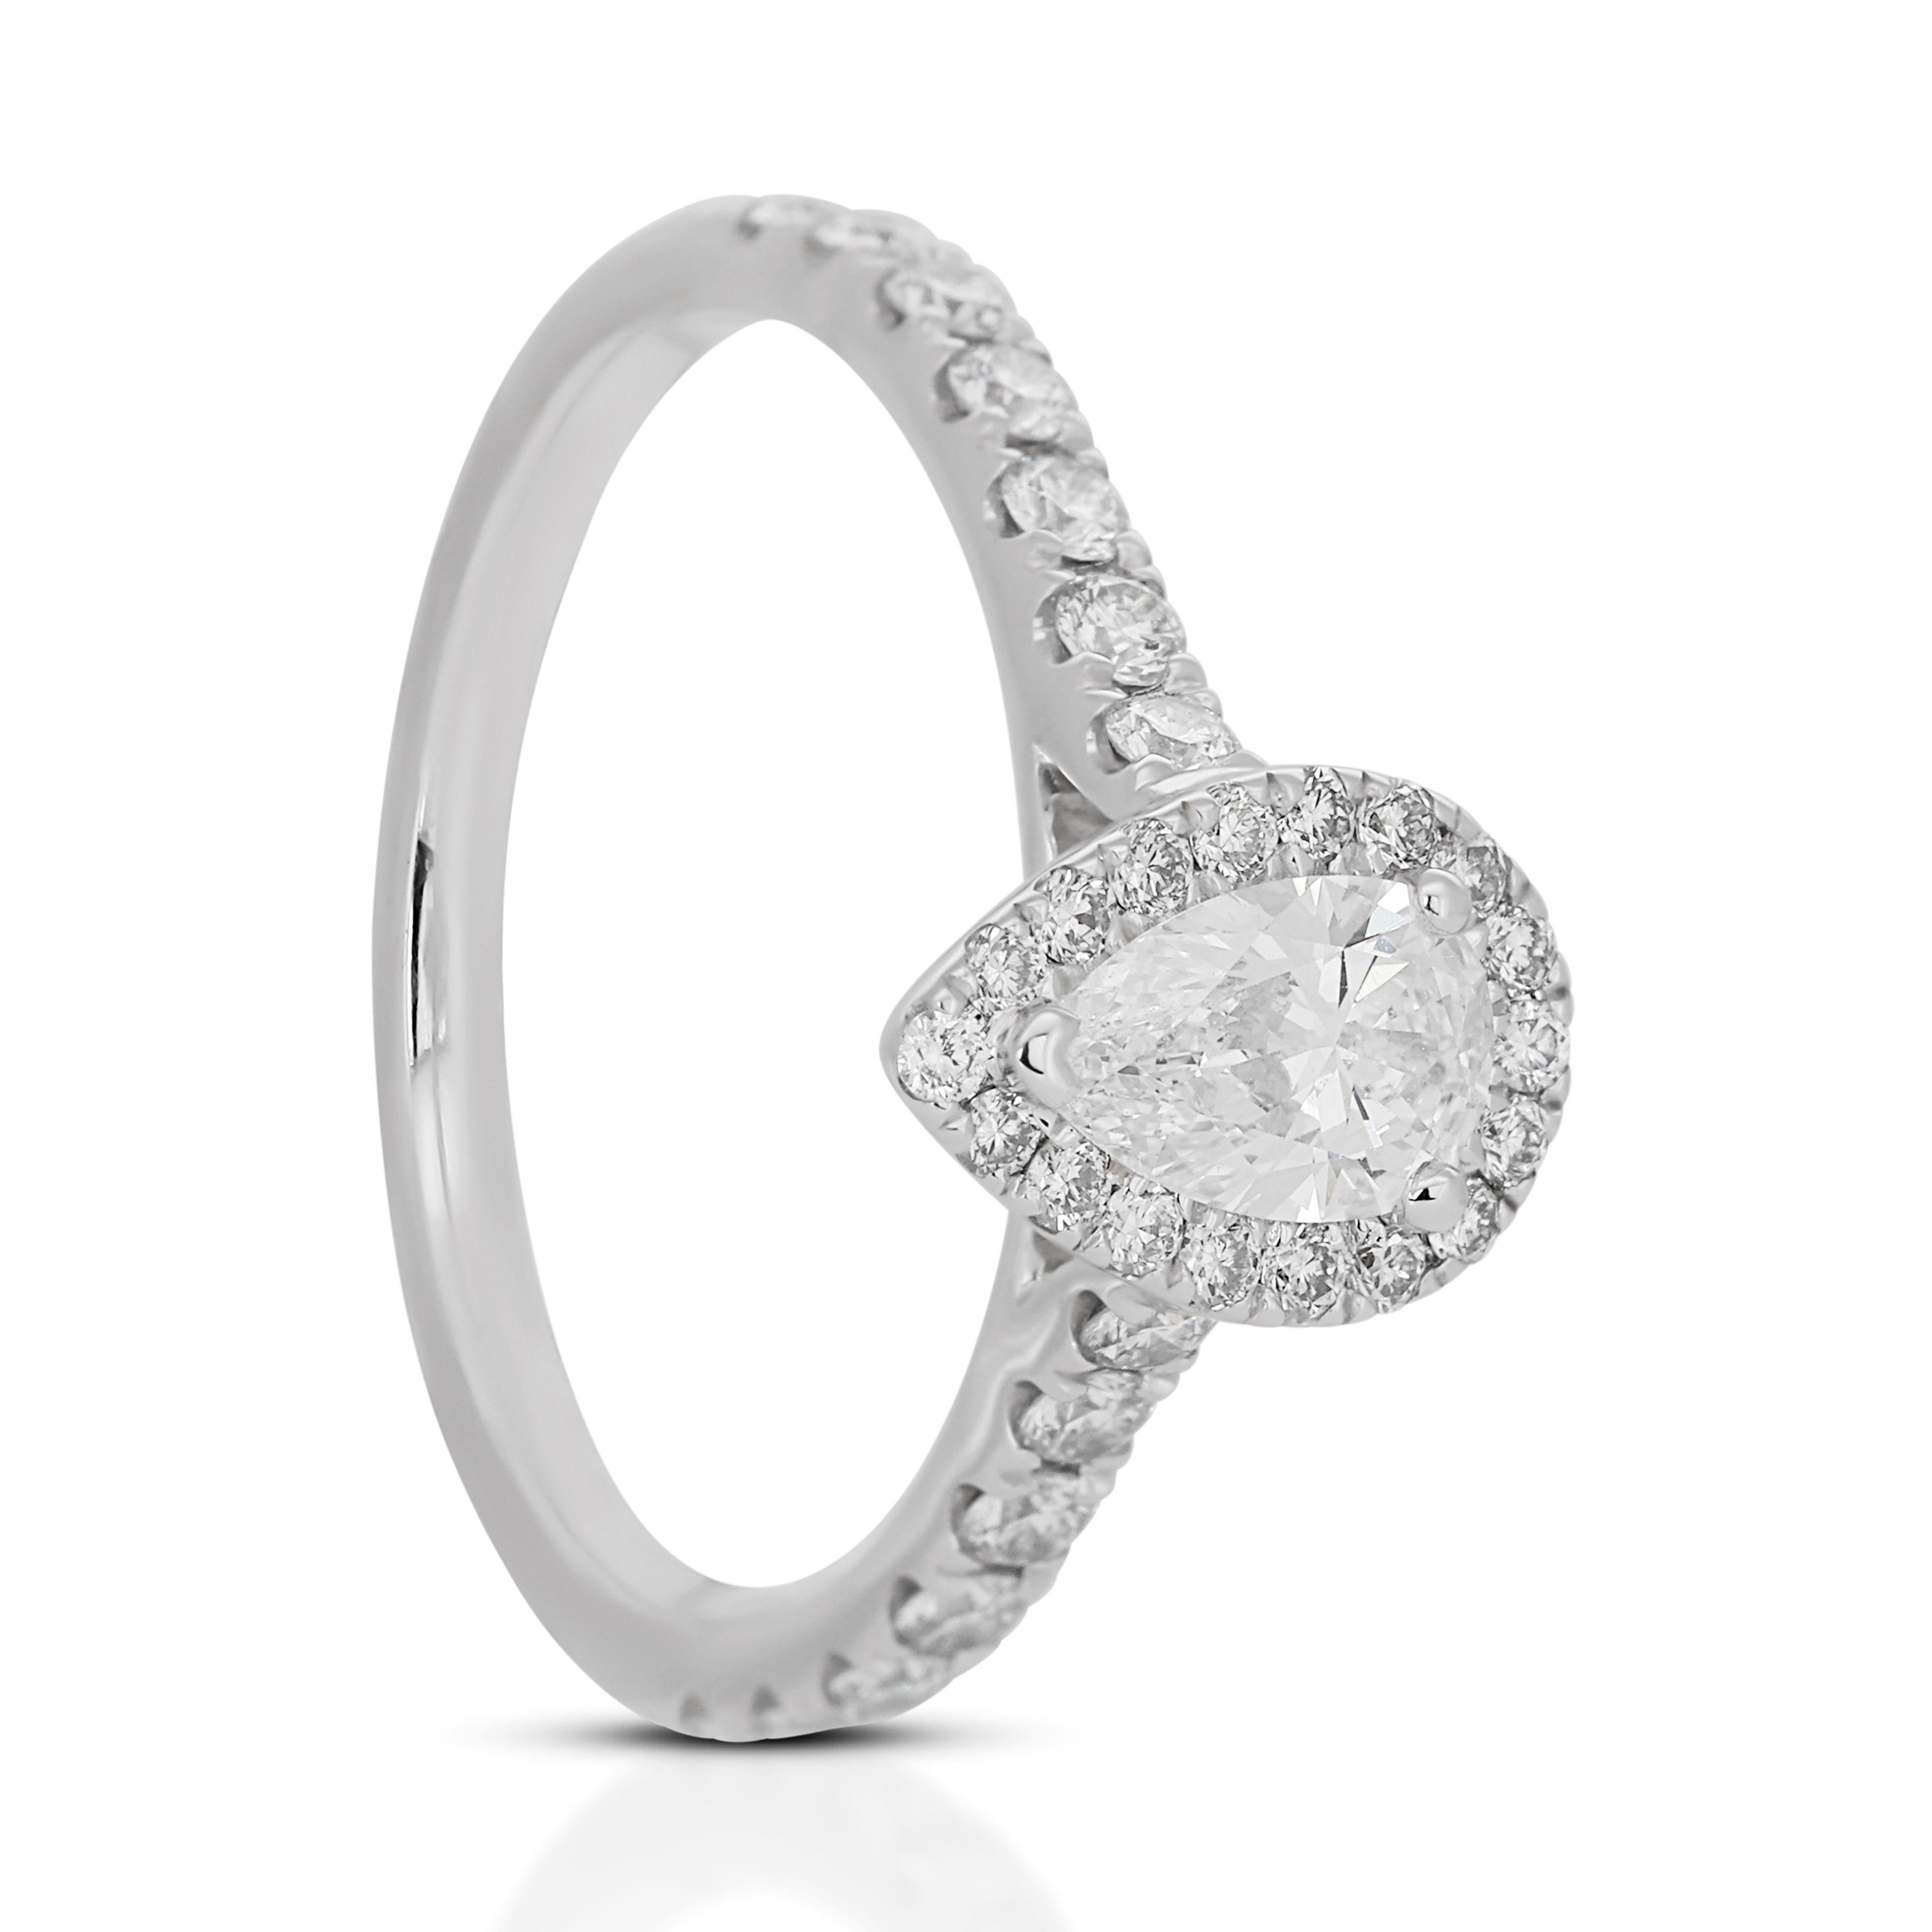 Elegant 18k White Gold with 0.71ct Pear-shaped Diamond Ring For Sale 3